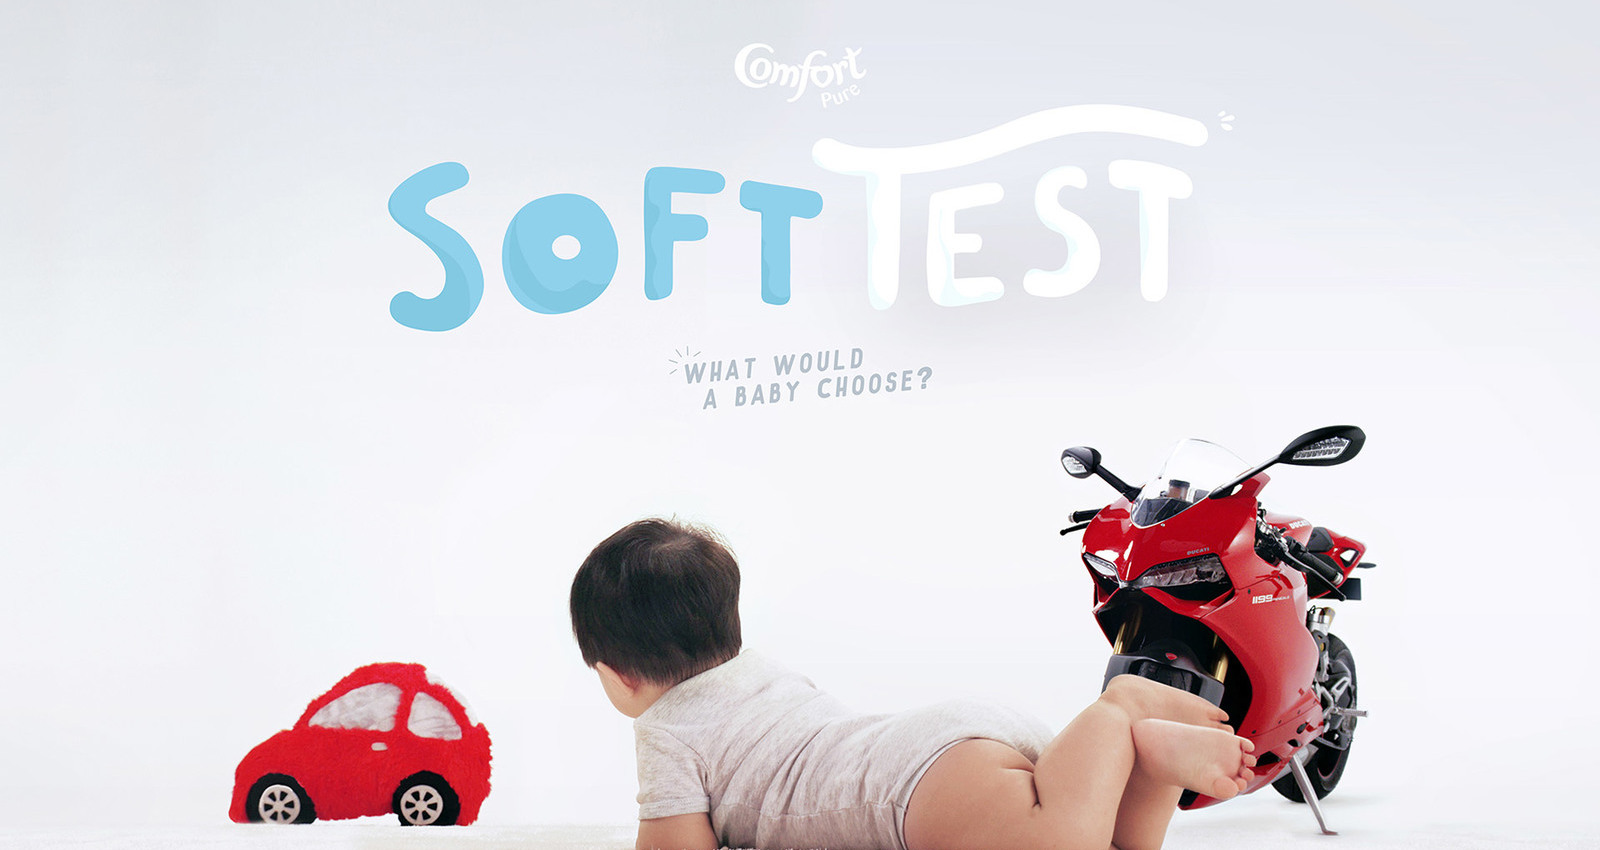 The Softtest